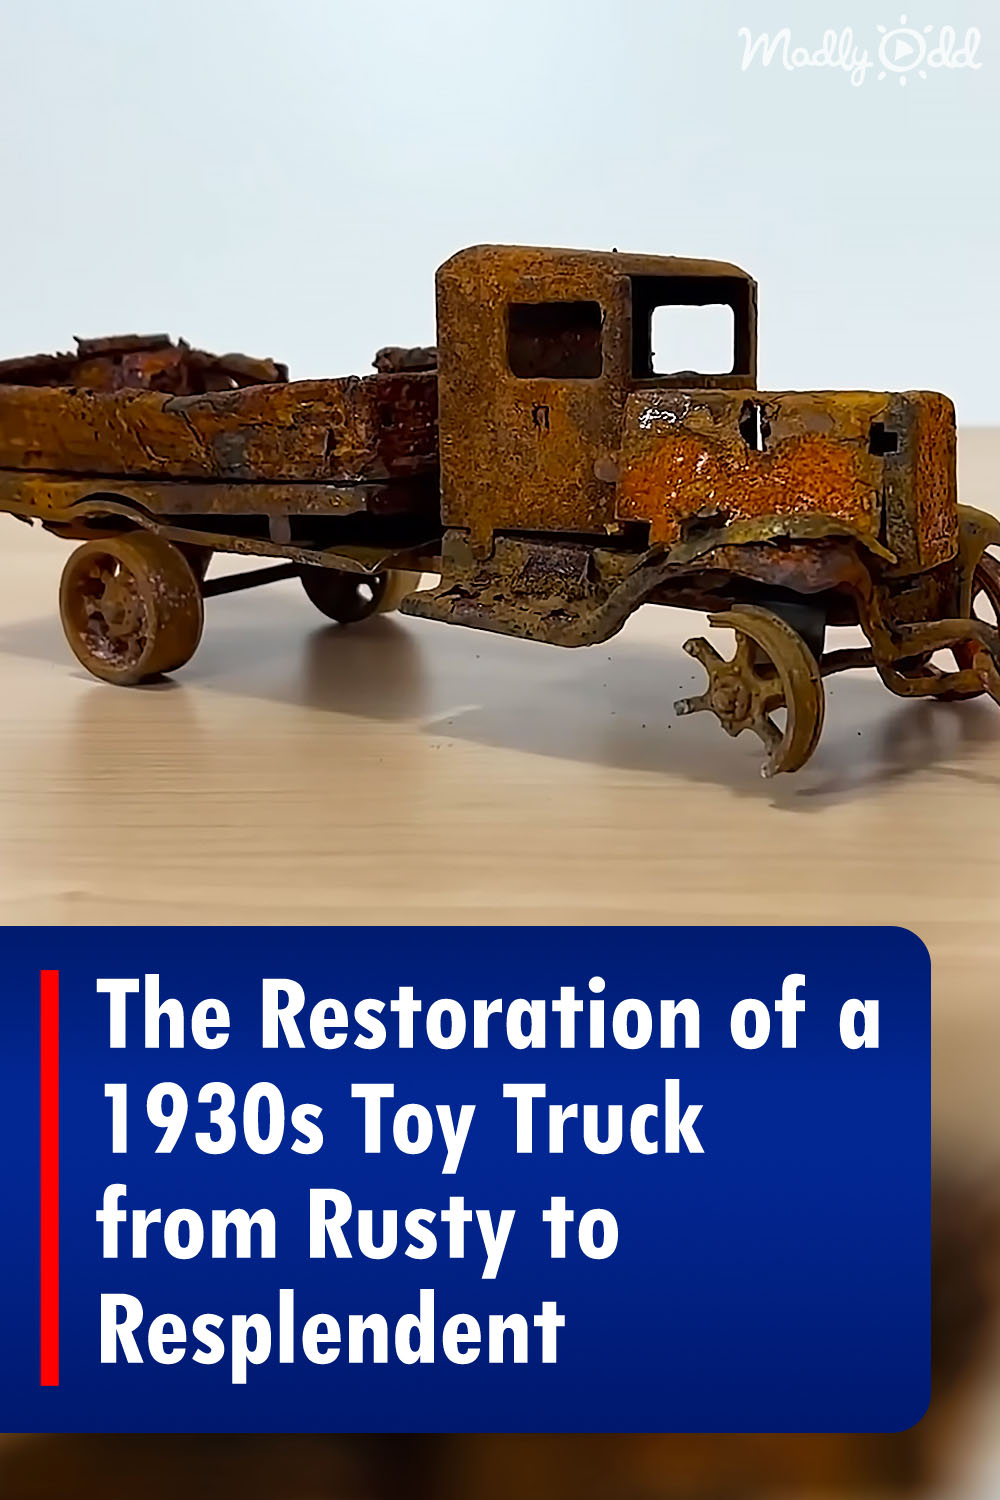 The Restoration of a 1930s Toy Truck from Rusty to Resplendent